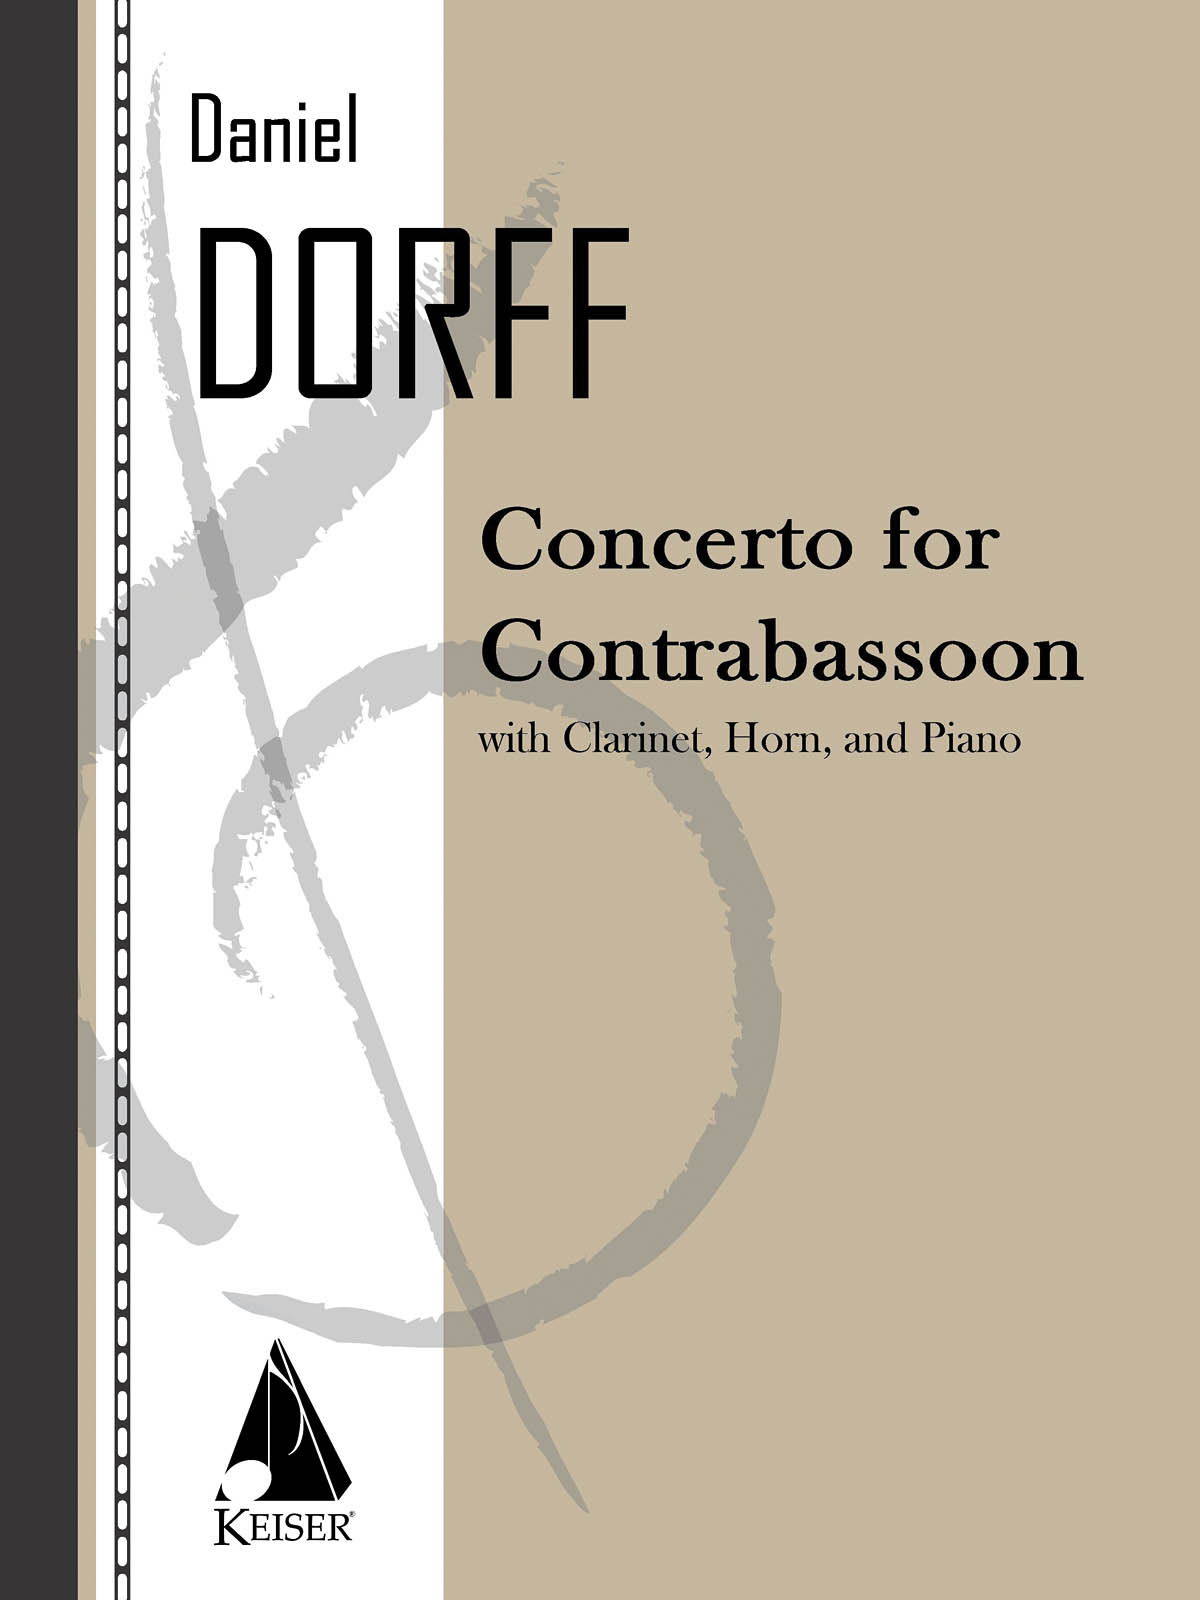 Concerto fuer Contrabassoon, Clarinet, Horn and Pno